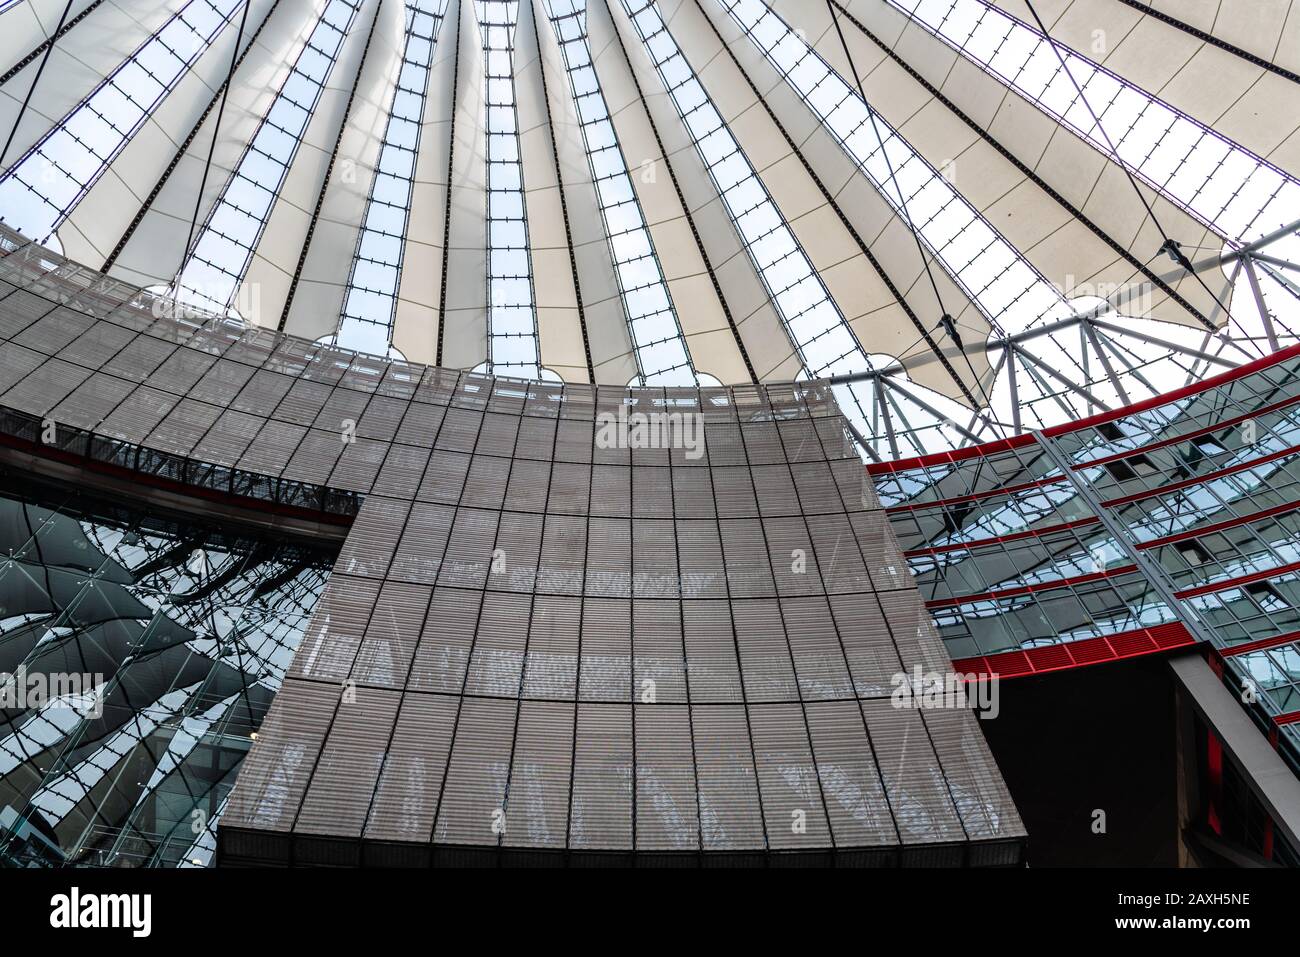 Berlin, Germany - July 28, 2019: The dome of the Sony Center. It is a Sony-sponsored building complex located at the Potsdamer Platz in Berlin Stock Photo